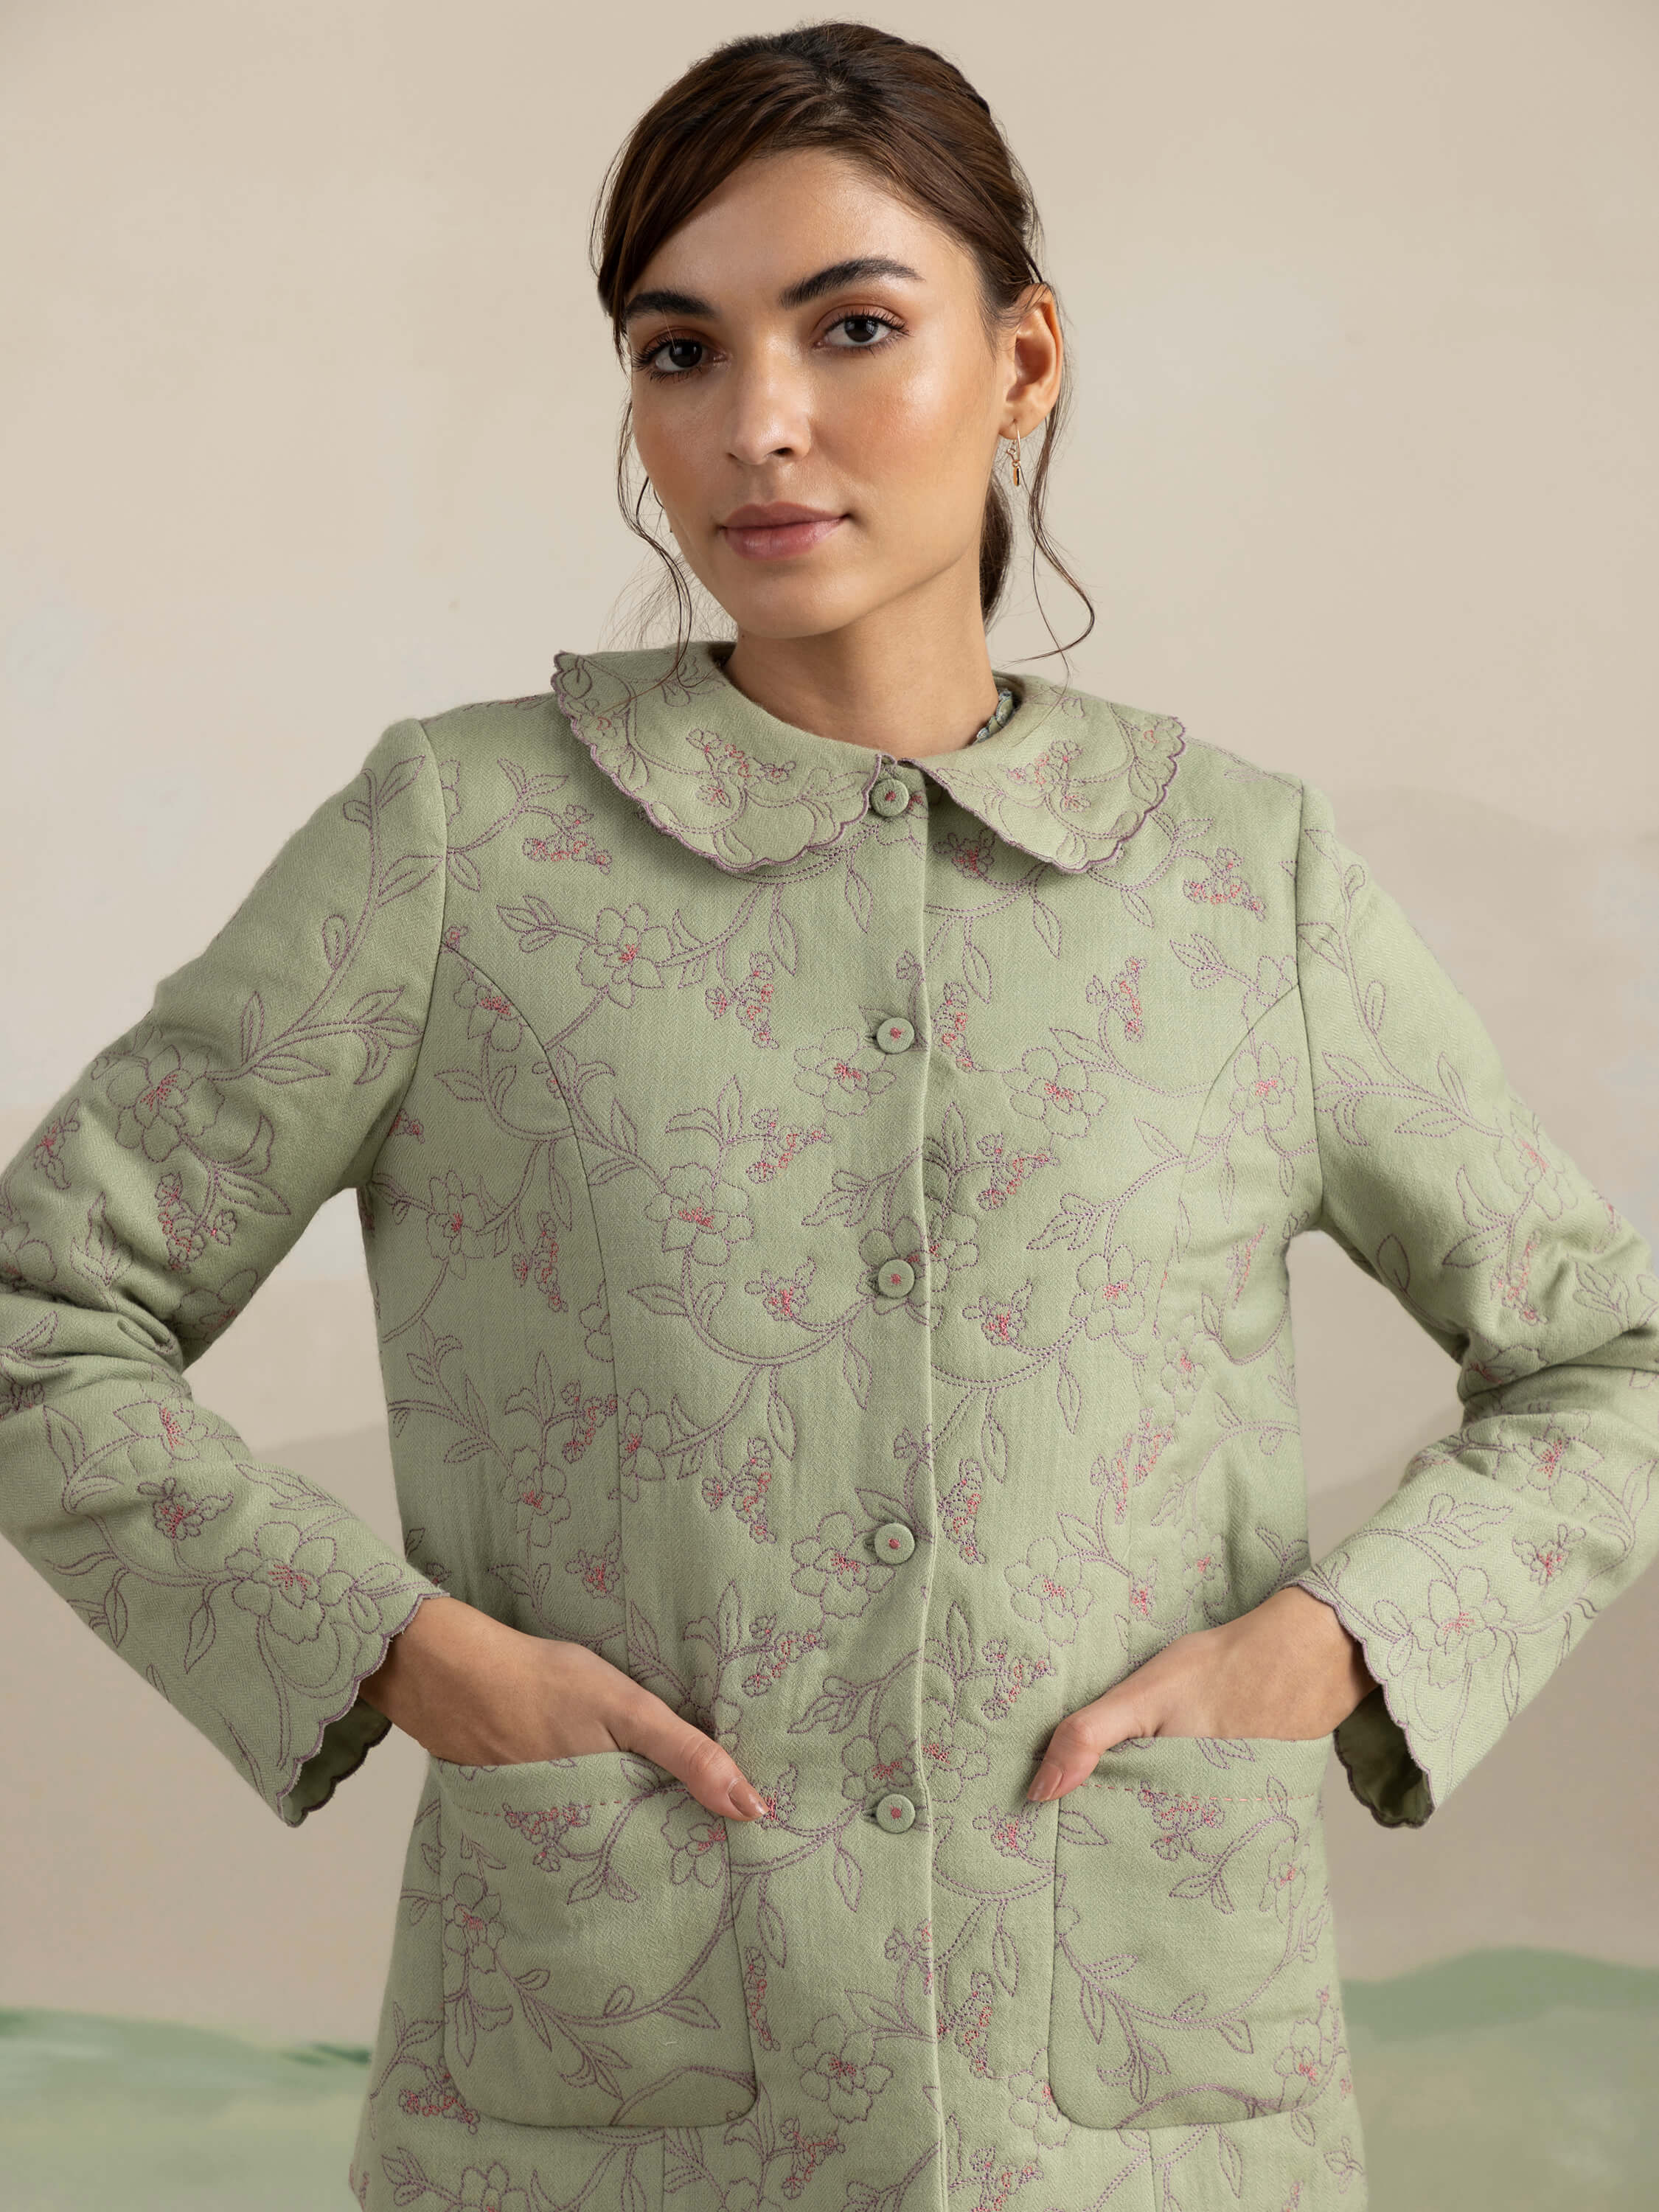 Woman wearing a green floral embroidered jacket with pockets.